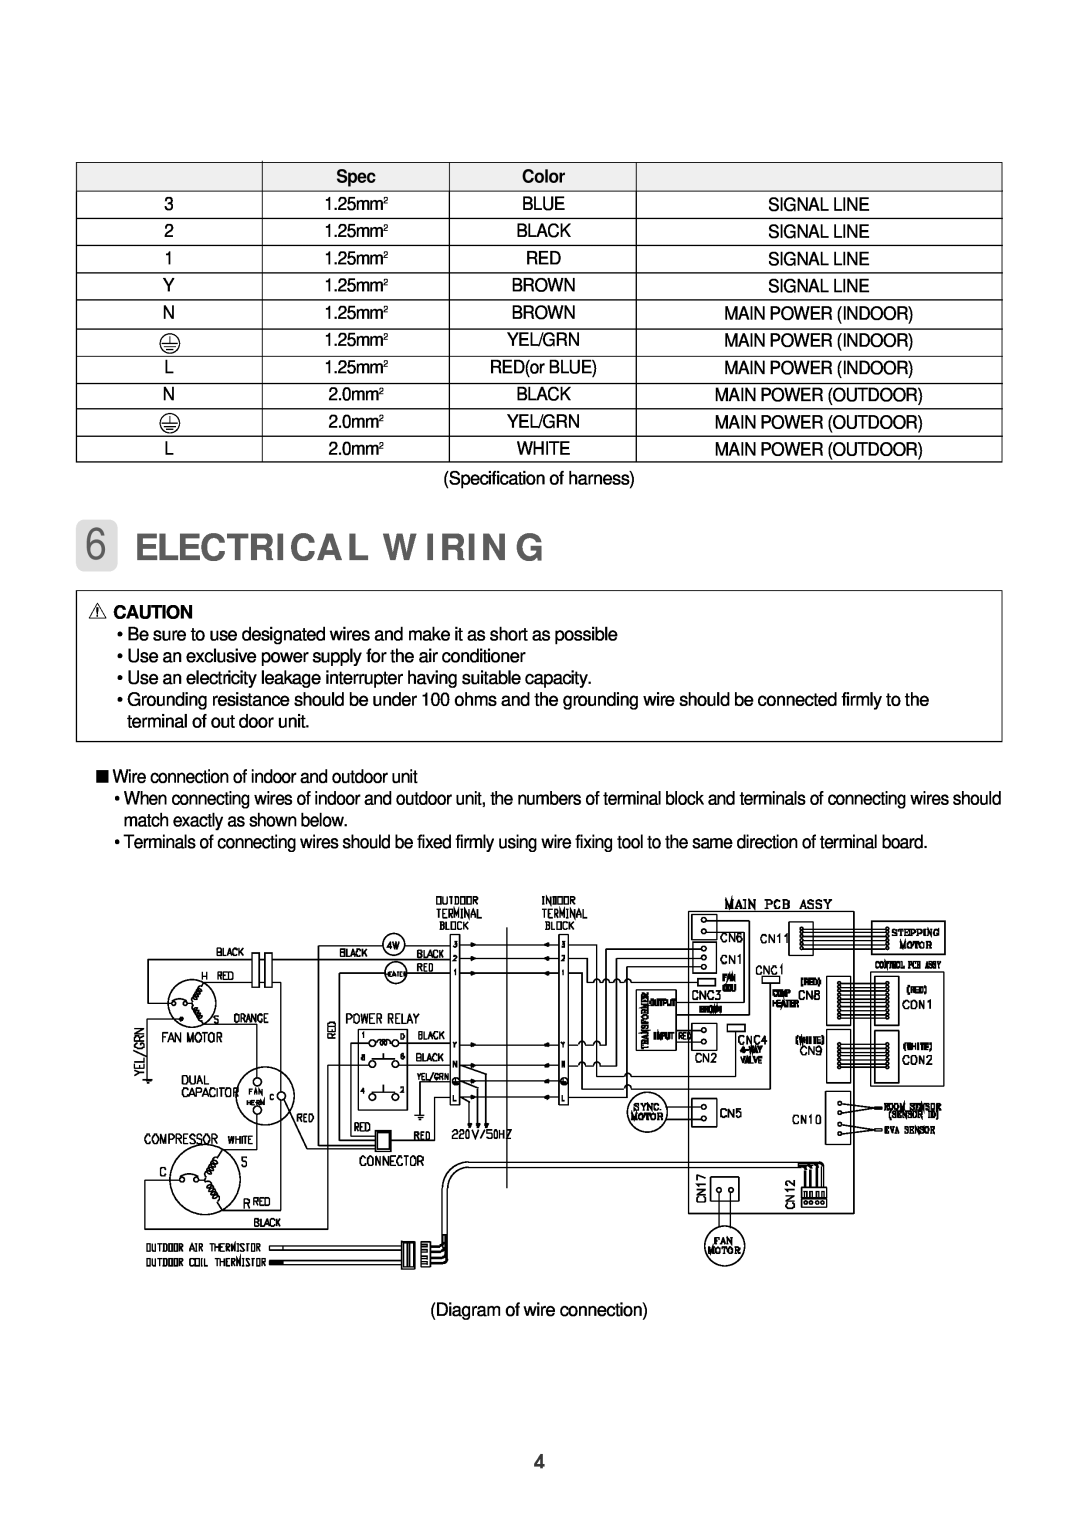 Daewoo DPB-280LH service manual 6ELECTRICAL WIRING, Spec, Color 